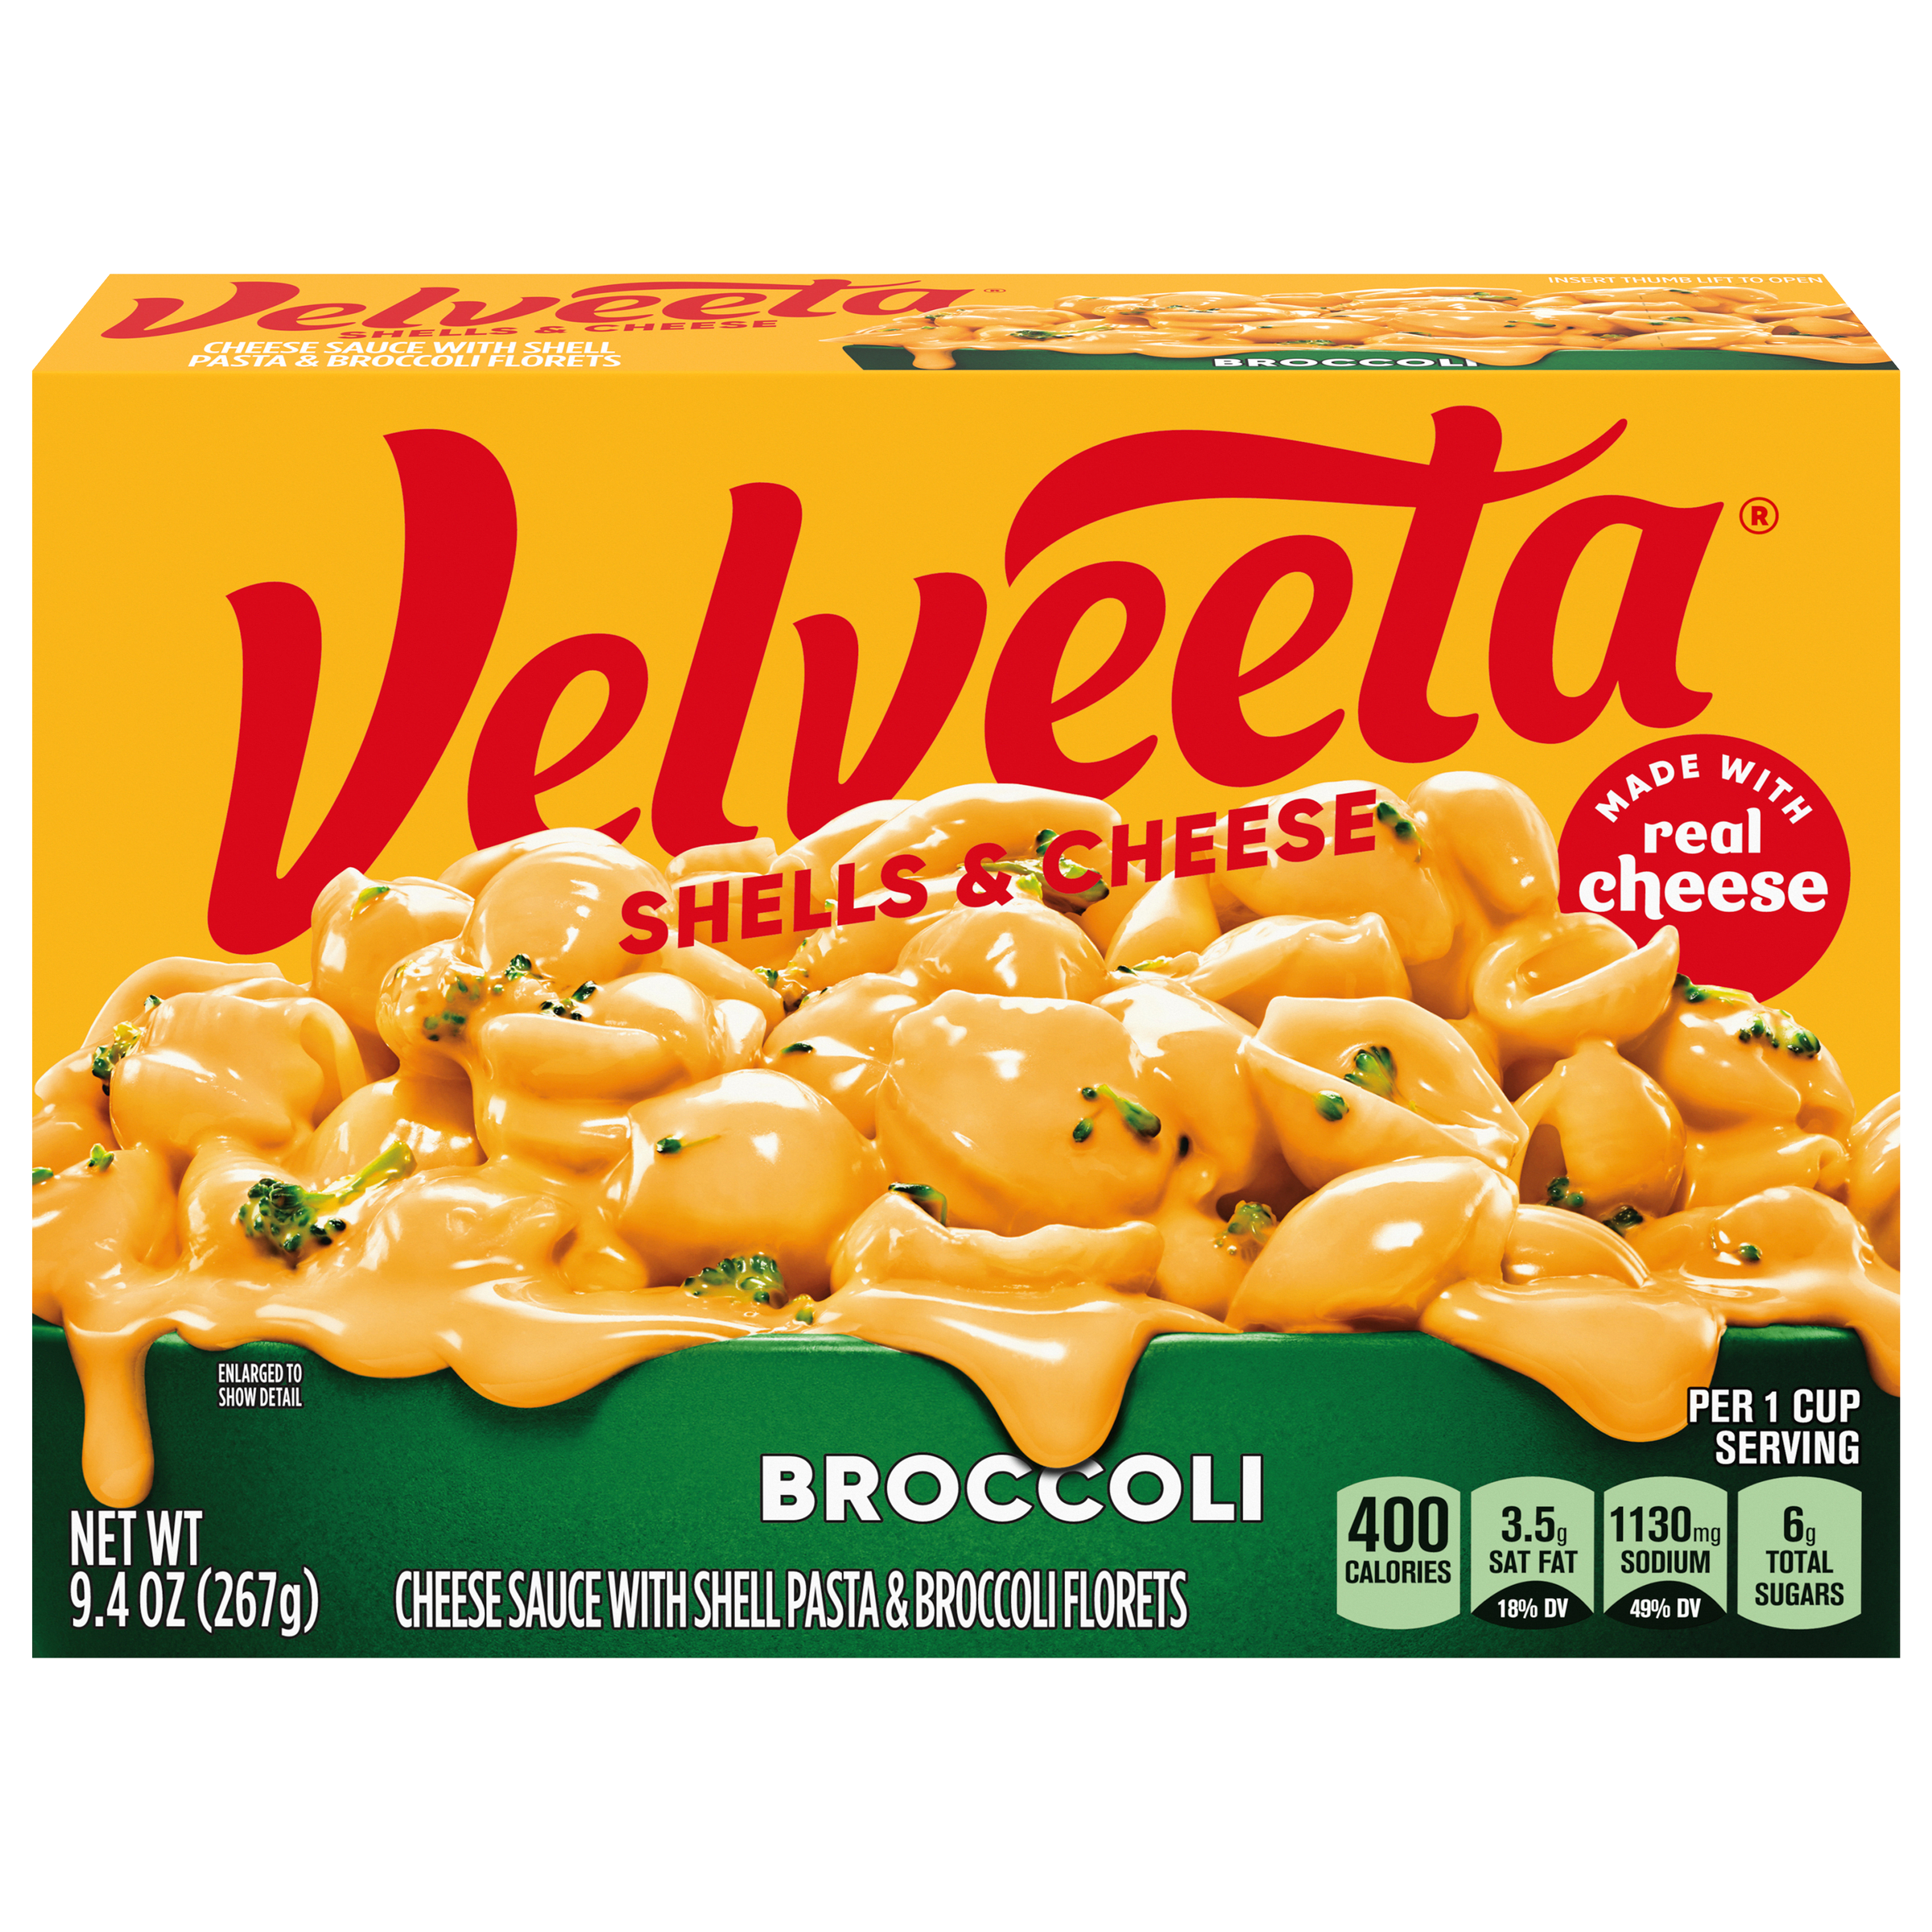 Shells & Cheese Macaroni and Cheese with Broccoli Florets Meal